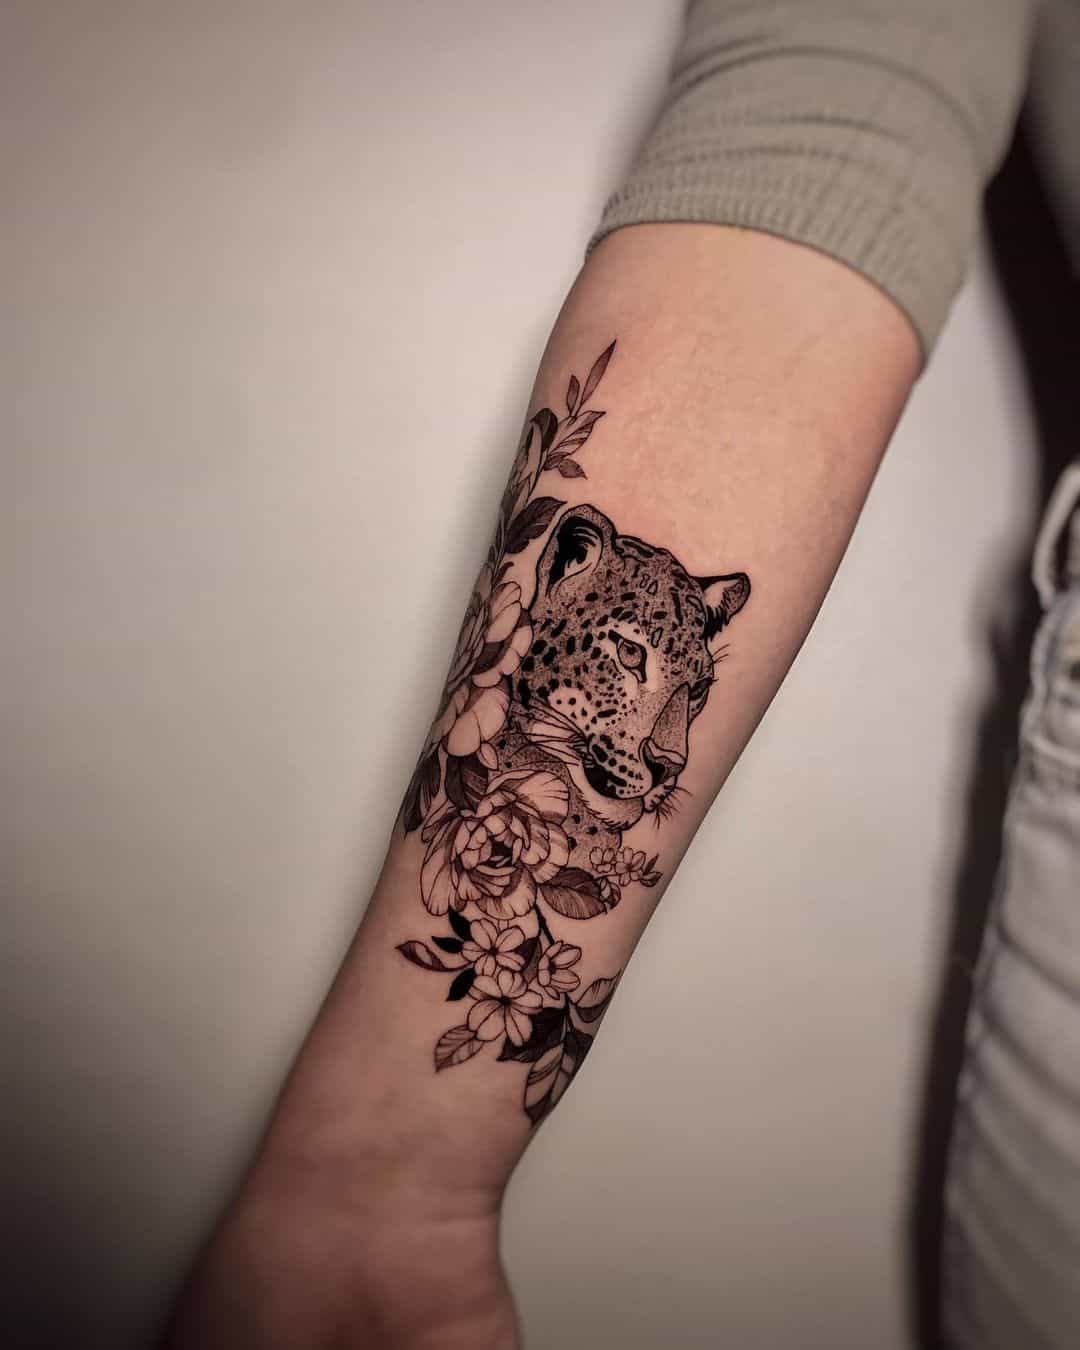 Floral tiger tattoo by yaso.ink